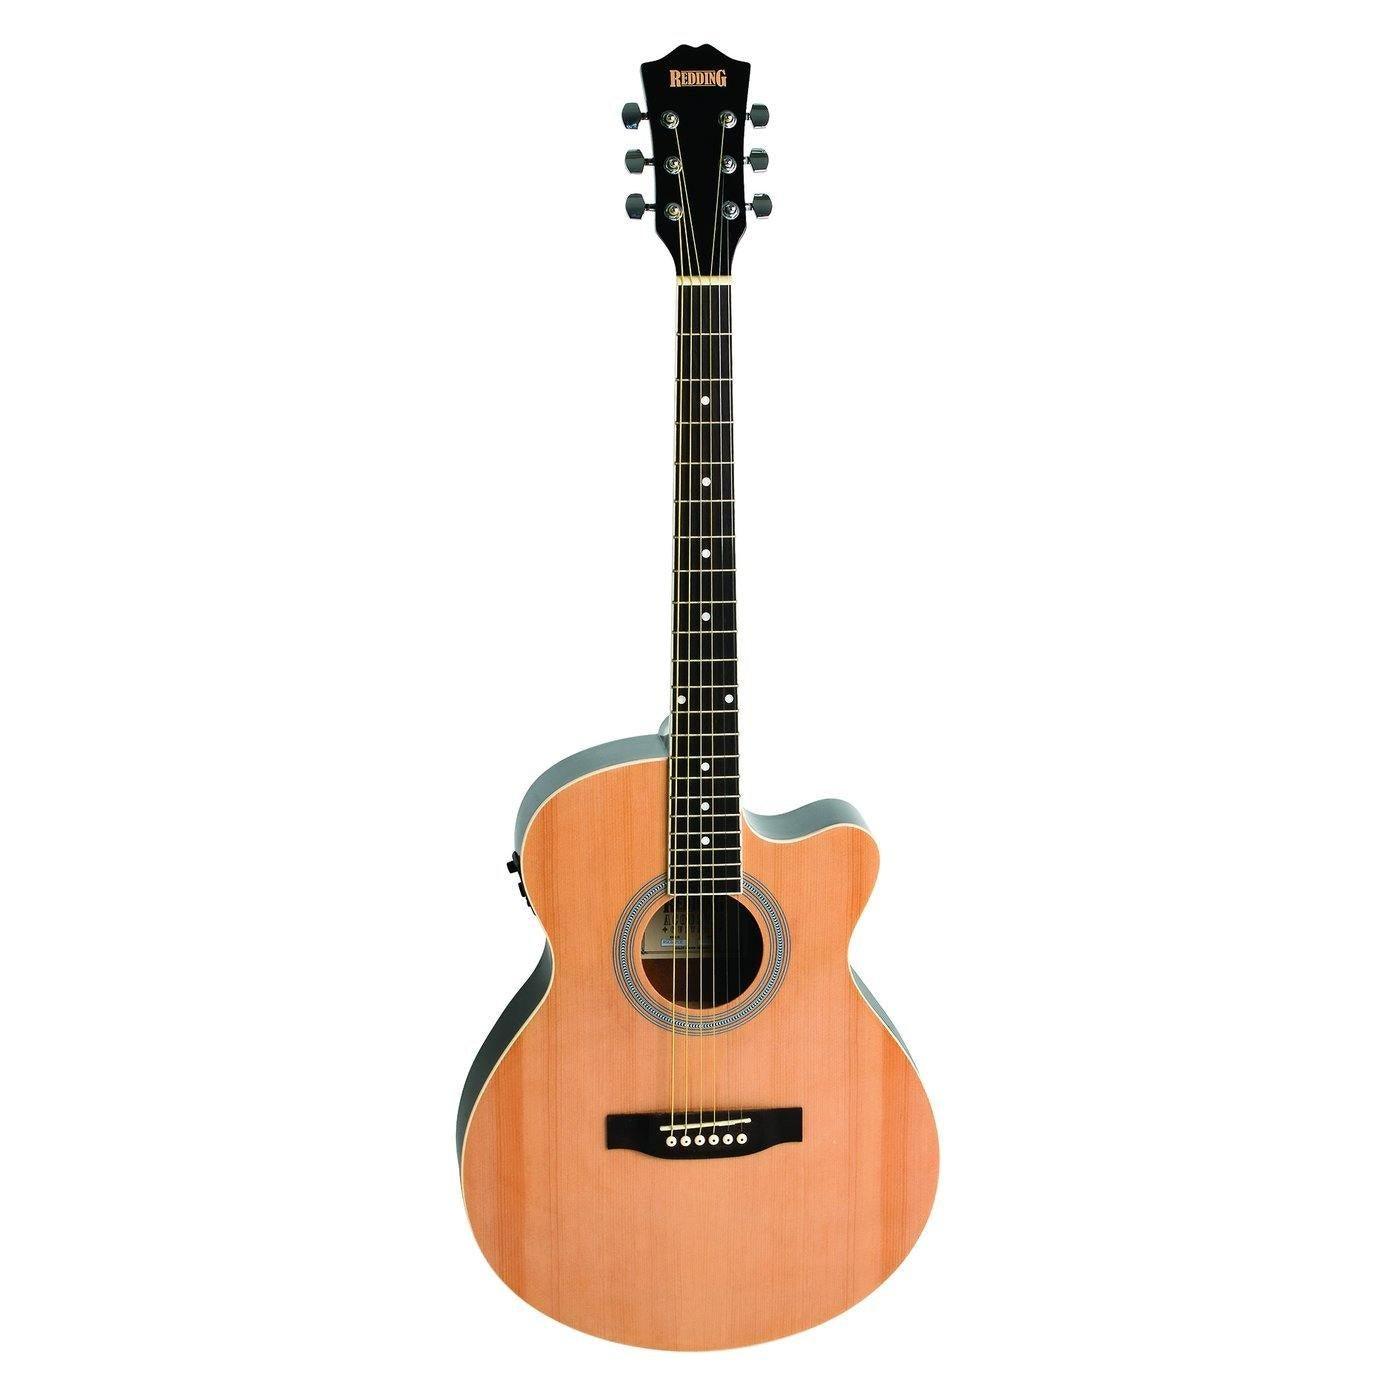 Grand-C Steel String A/E Natural Gloss - Guitars - Acoustic by Redding at Muso's Stuff